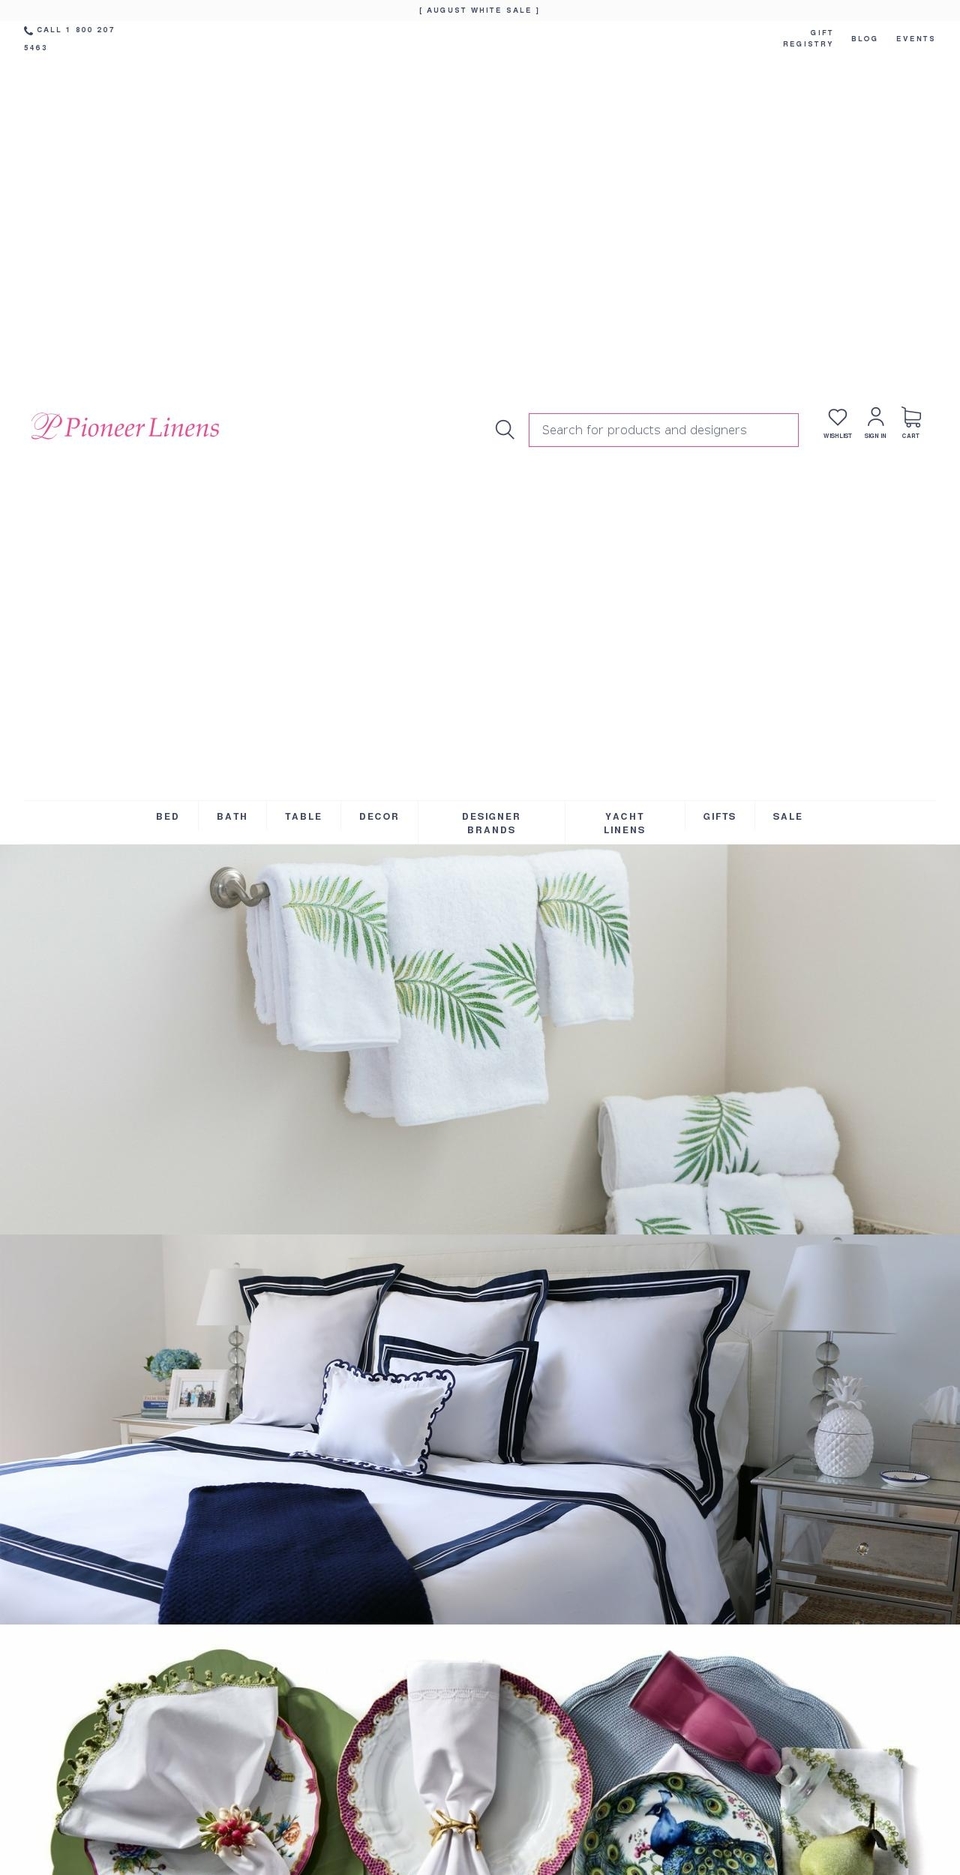 Buko Shopify Theme - Products Consolidation Shopify theme site example fortlaudylinens.com